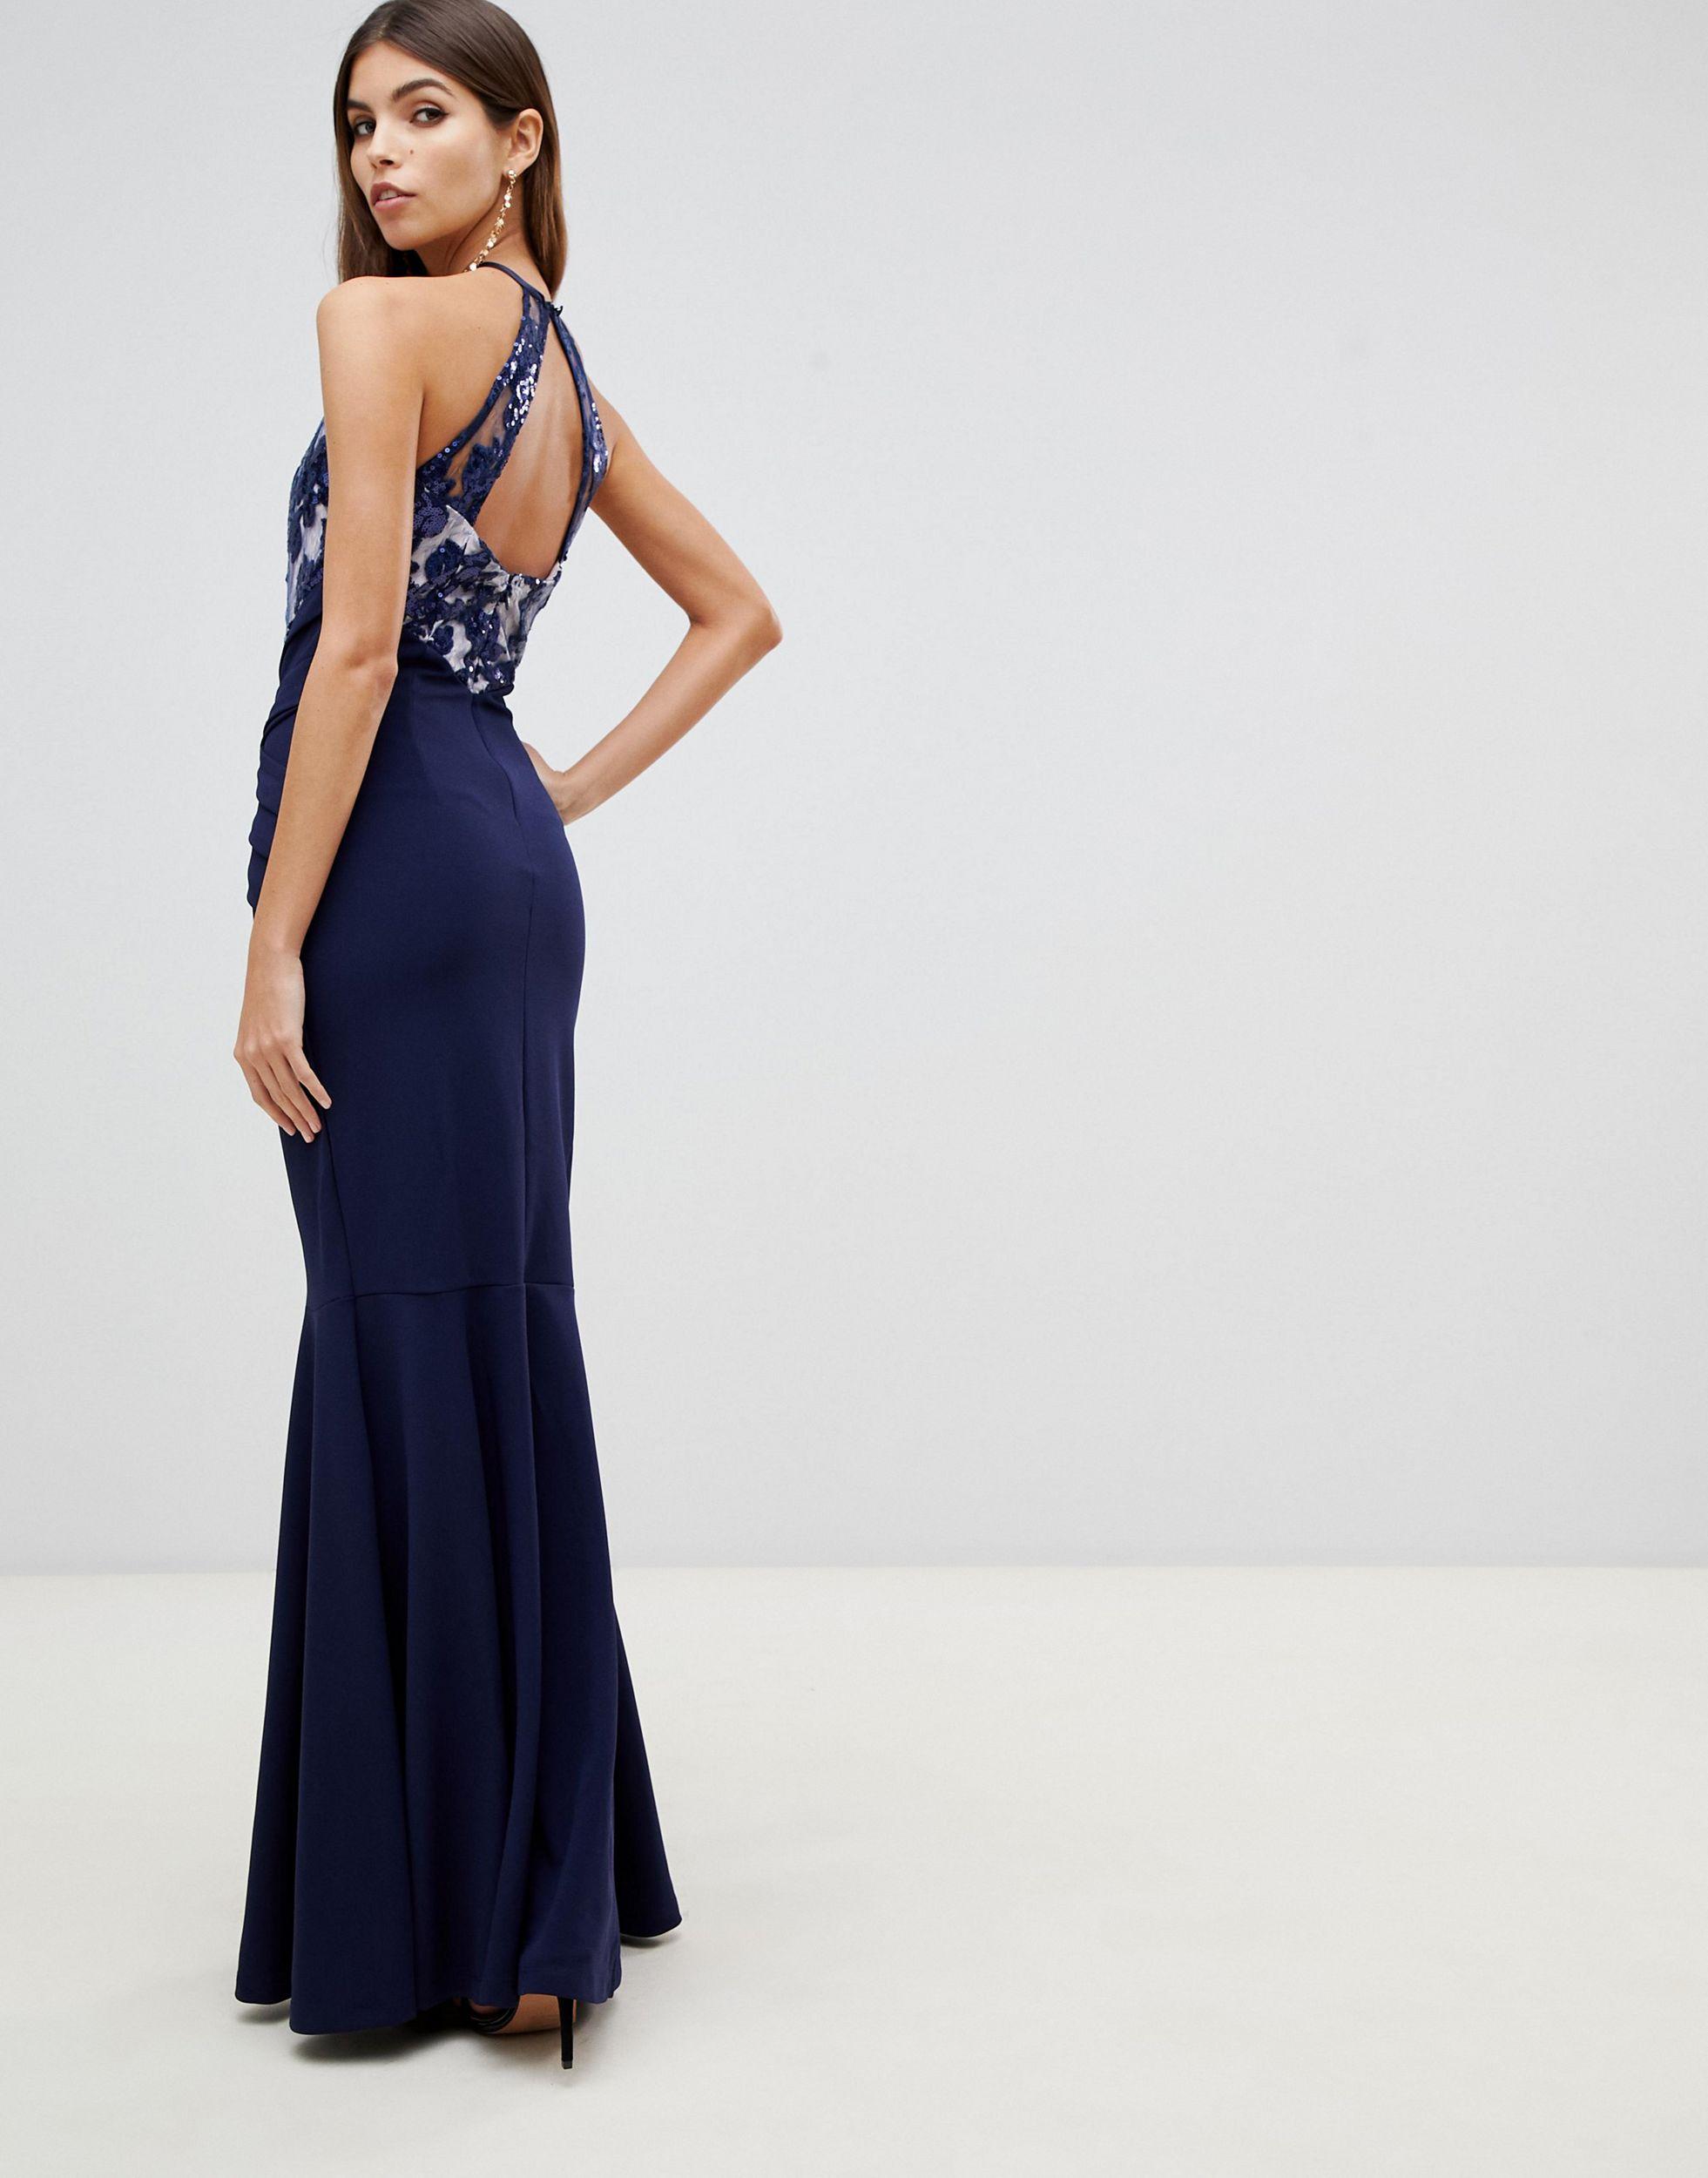 Lipsy Lace Detail Maxi Dress in Navy (Blue) - Lyst